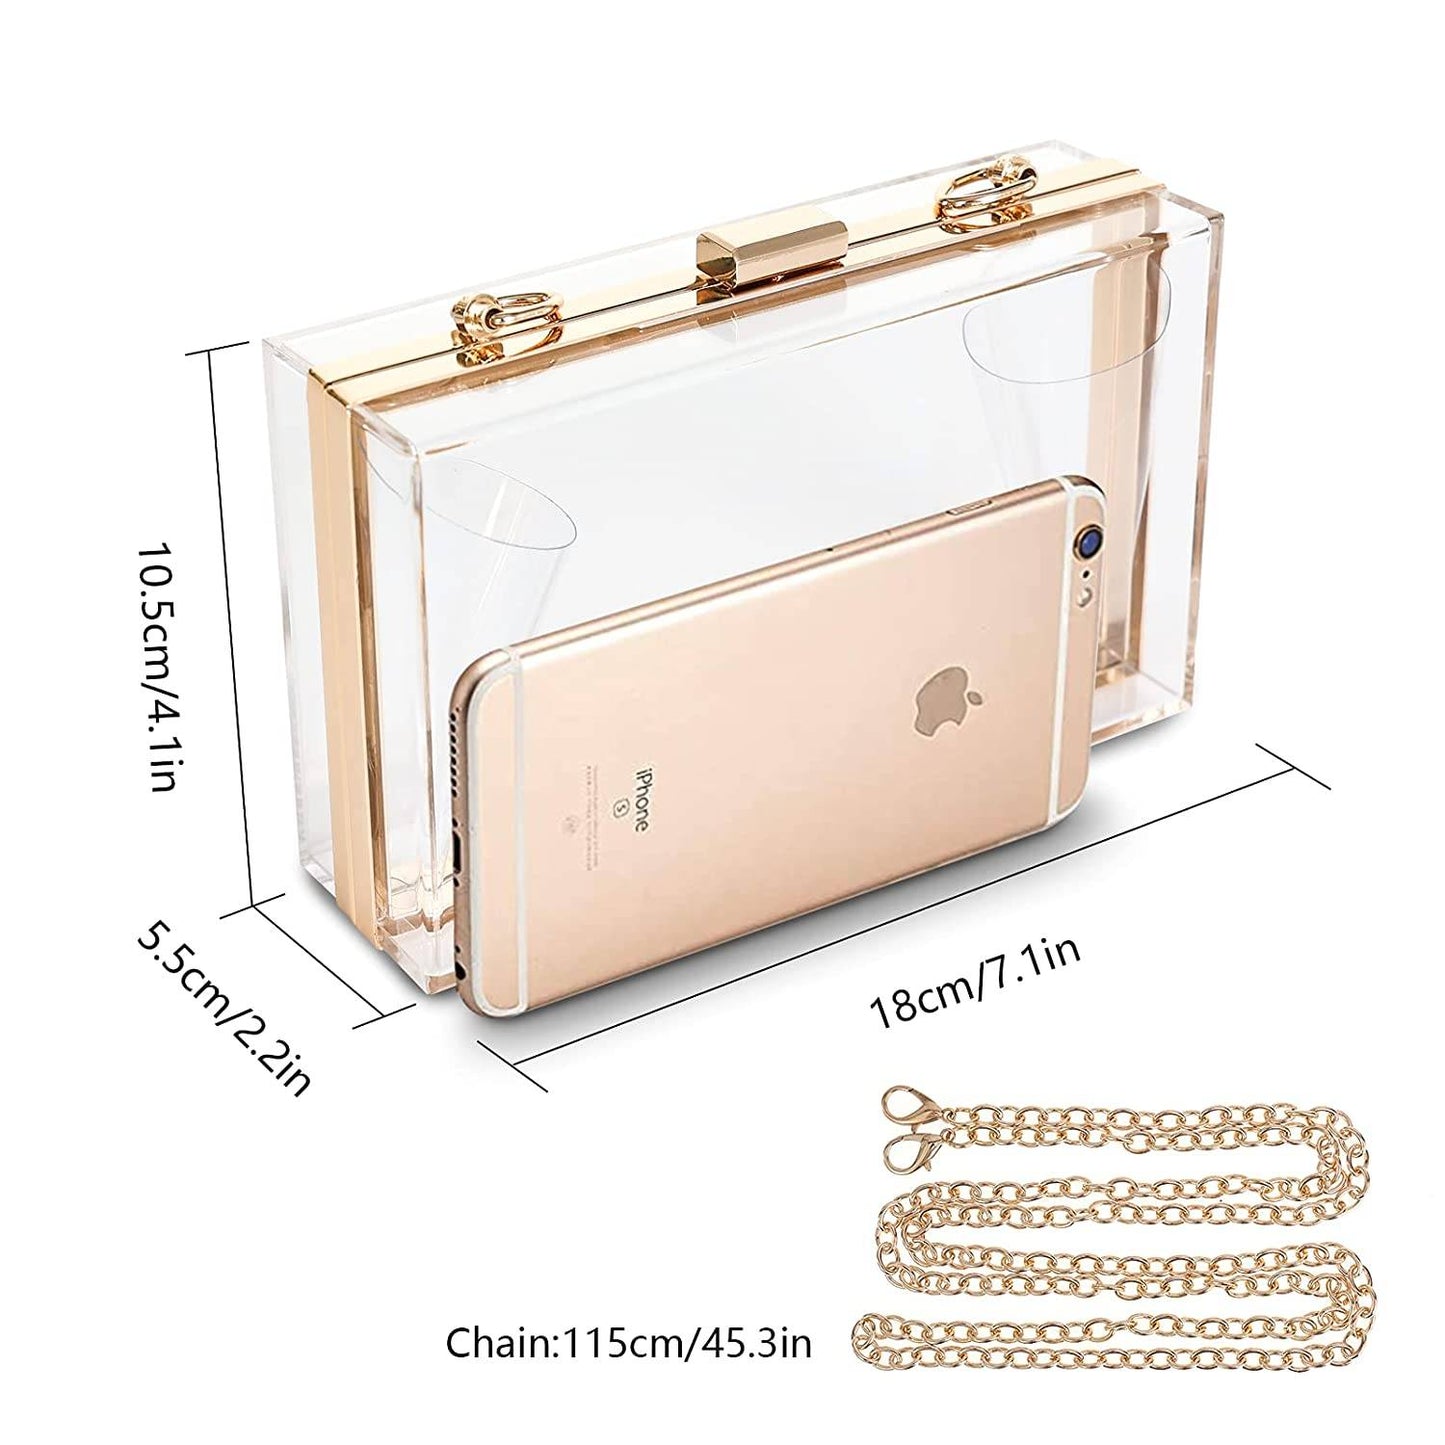 WJCD Women Clear Purse Acrylic Clear Clutch Bag, Shoulder Handbag With Removable Gold Chain Strap